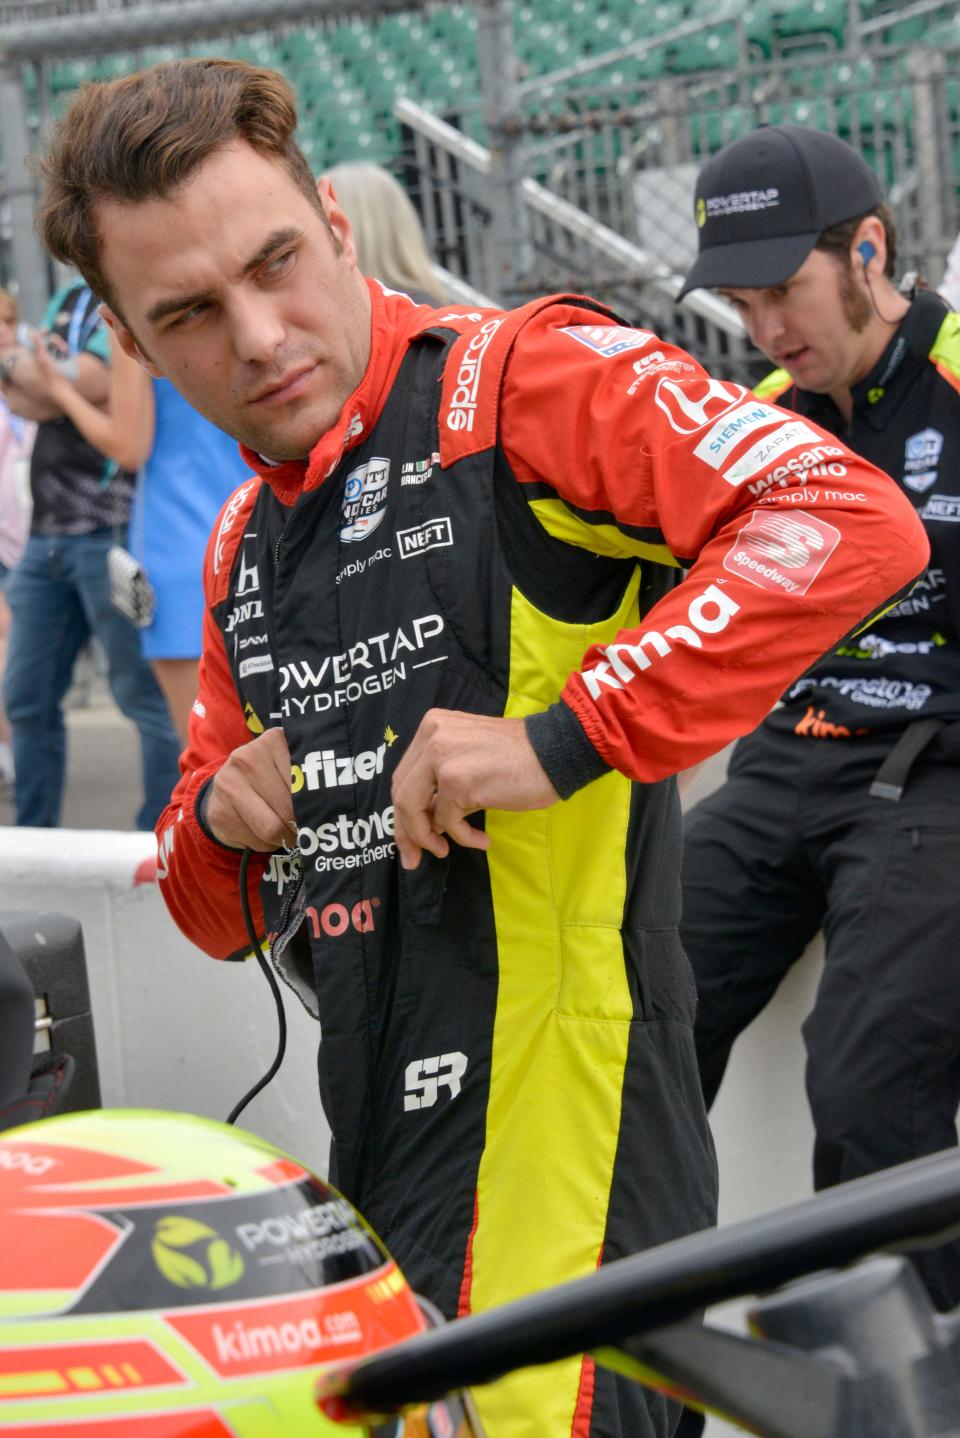 Andretti Steinbrenner Autosport driver Devlin DeFrancesco (29) prepares to get into his car Saturday, May 21, 2022, during the first day of qualifying for the 106th running of the Indianapolis 500 at Indianapolis Motor Speedway